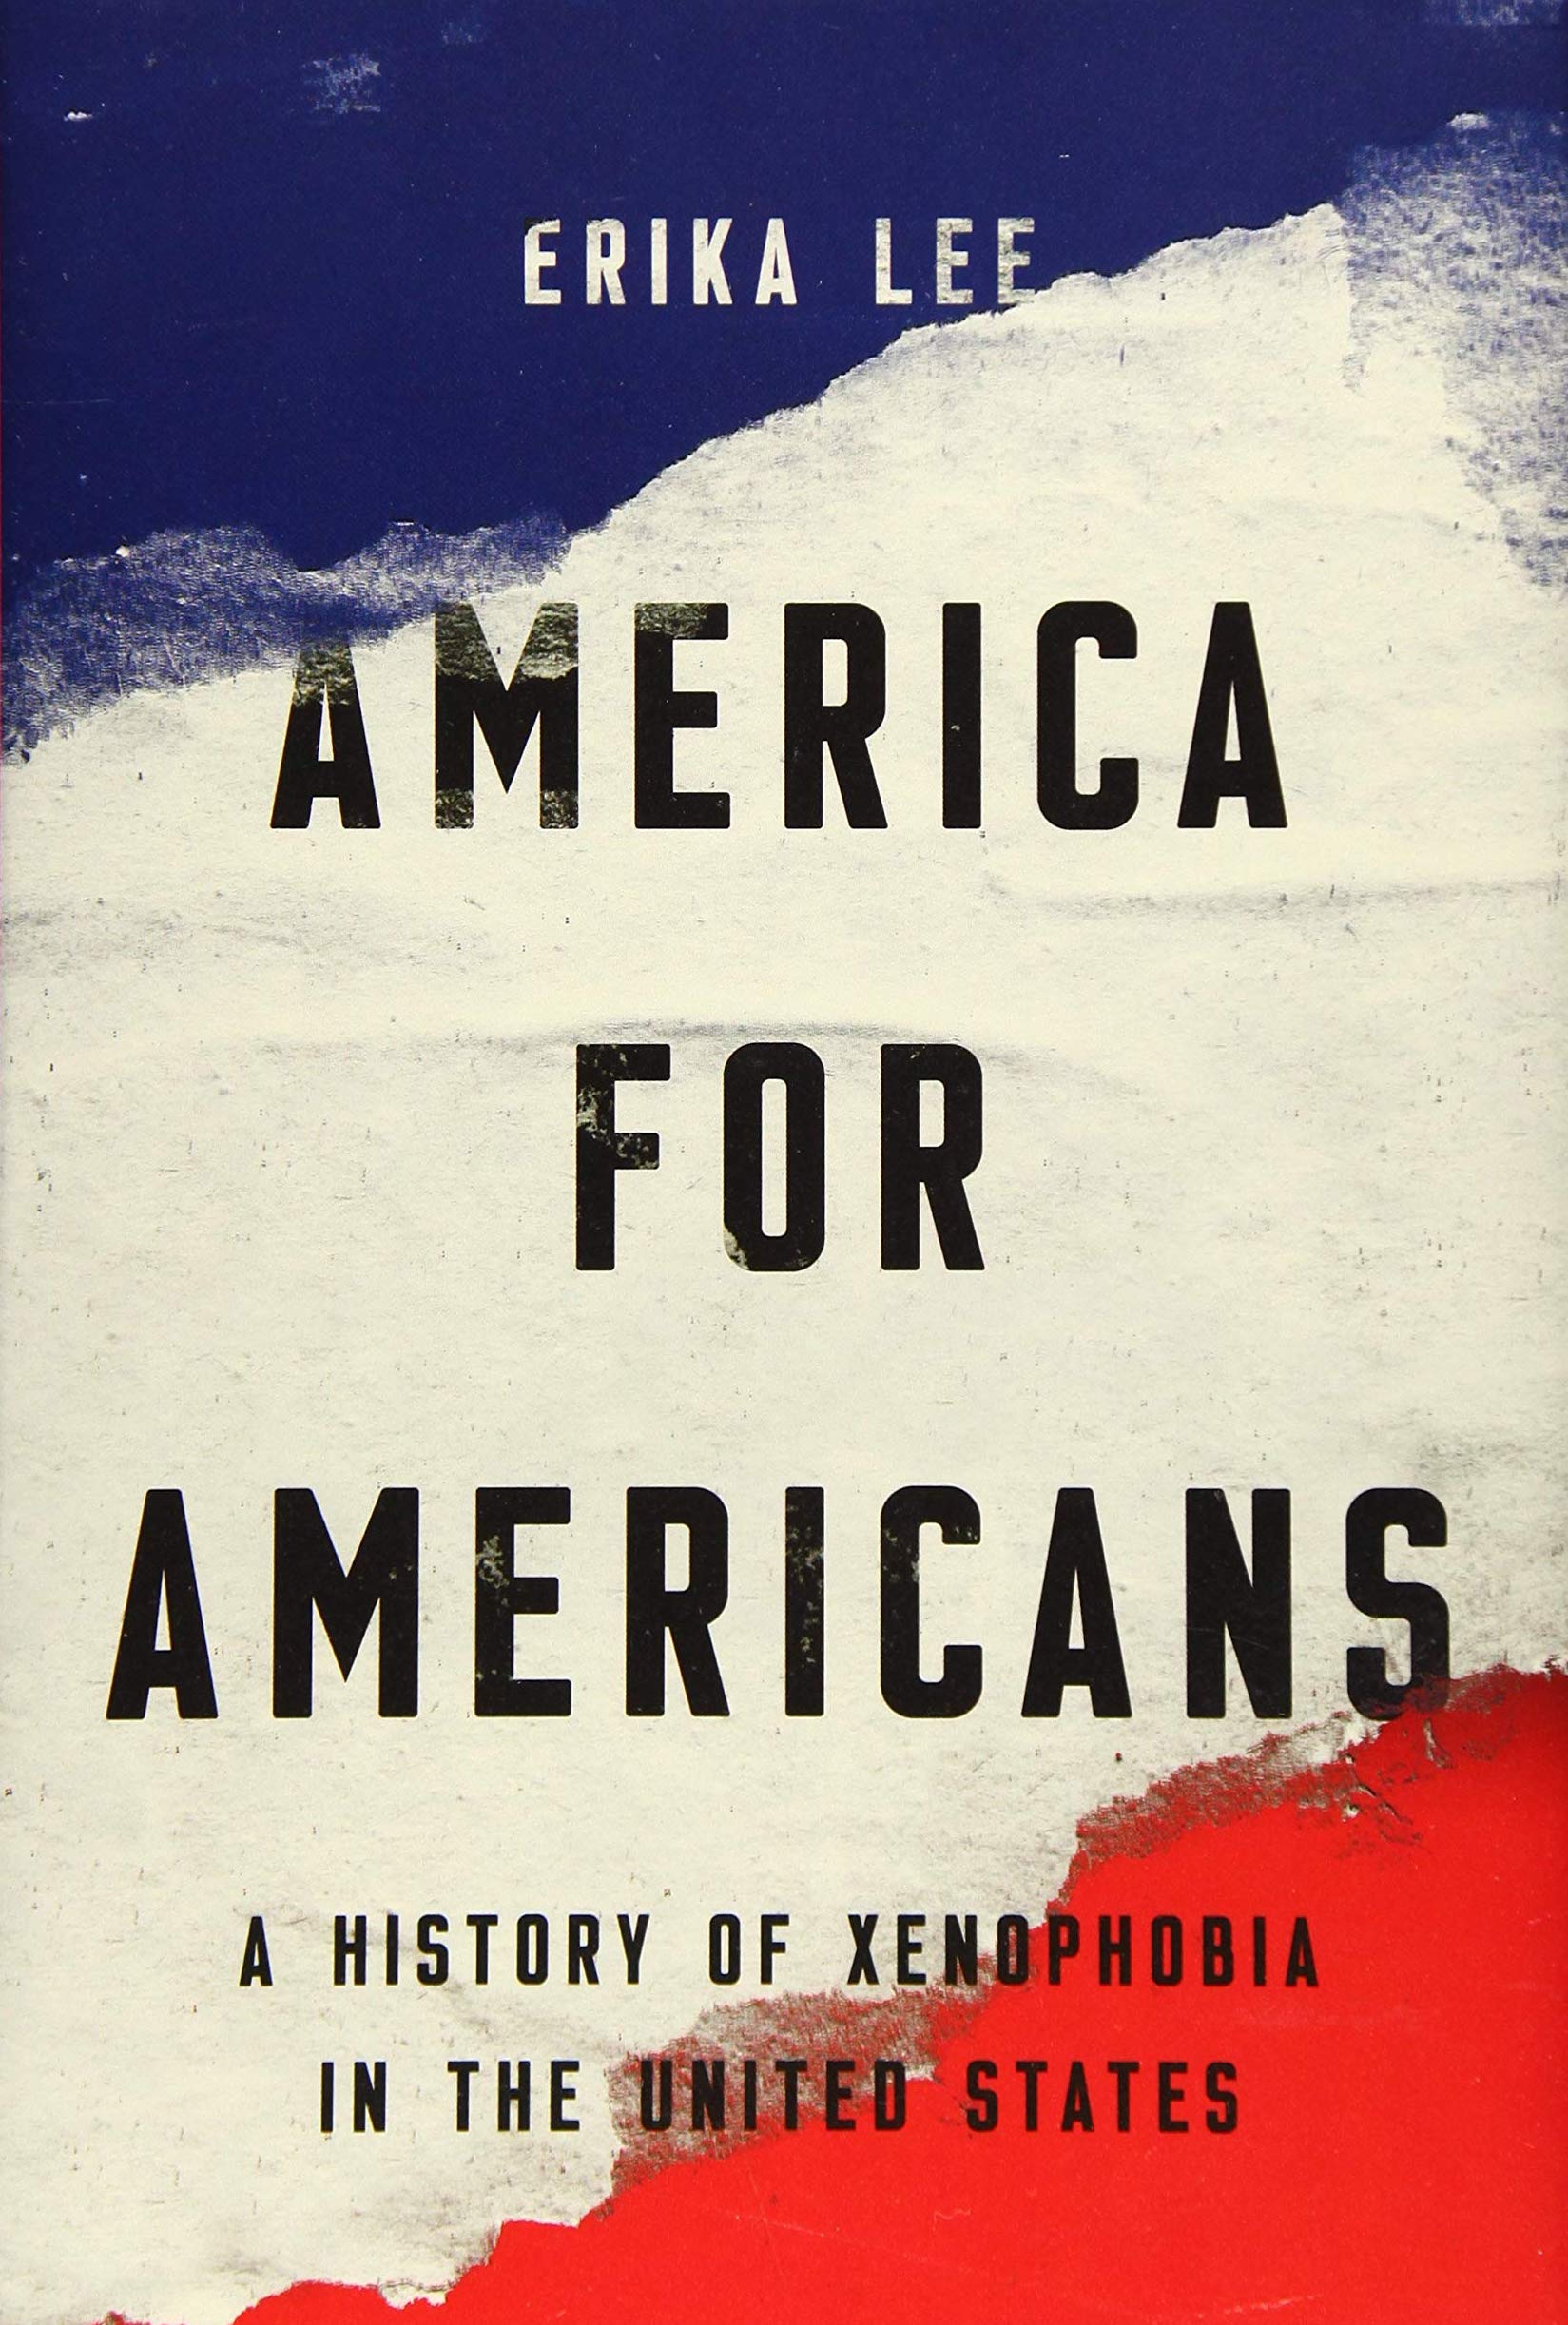 Book cover of "America for Americans"